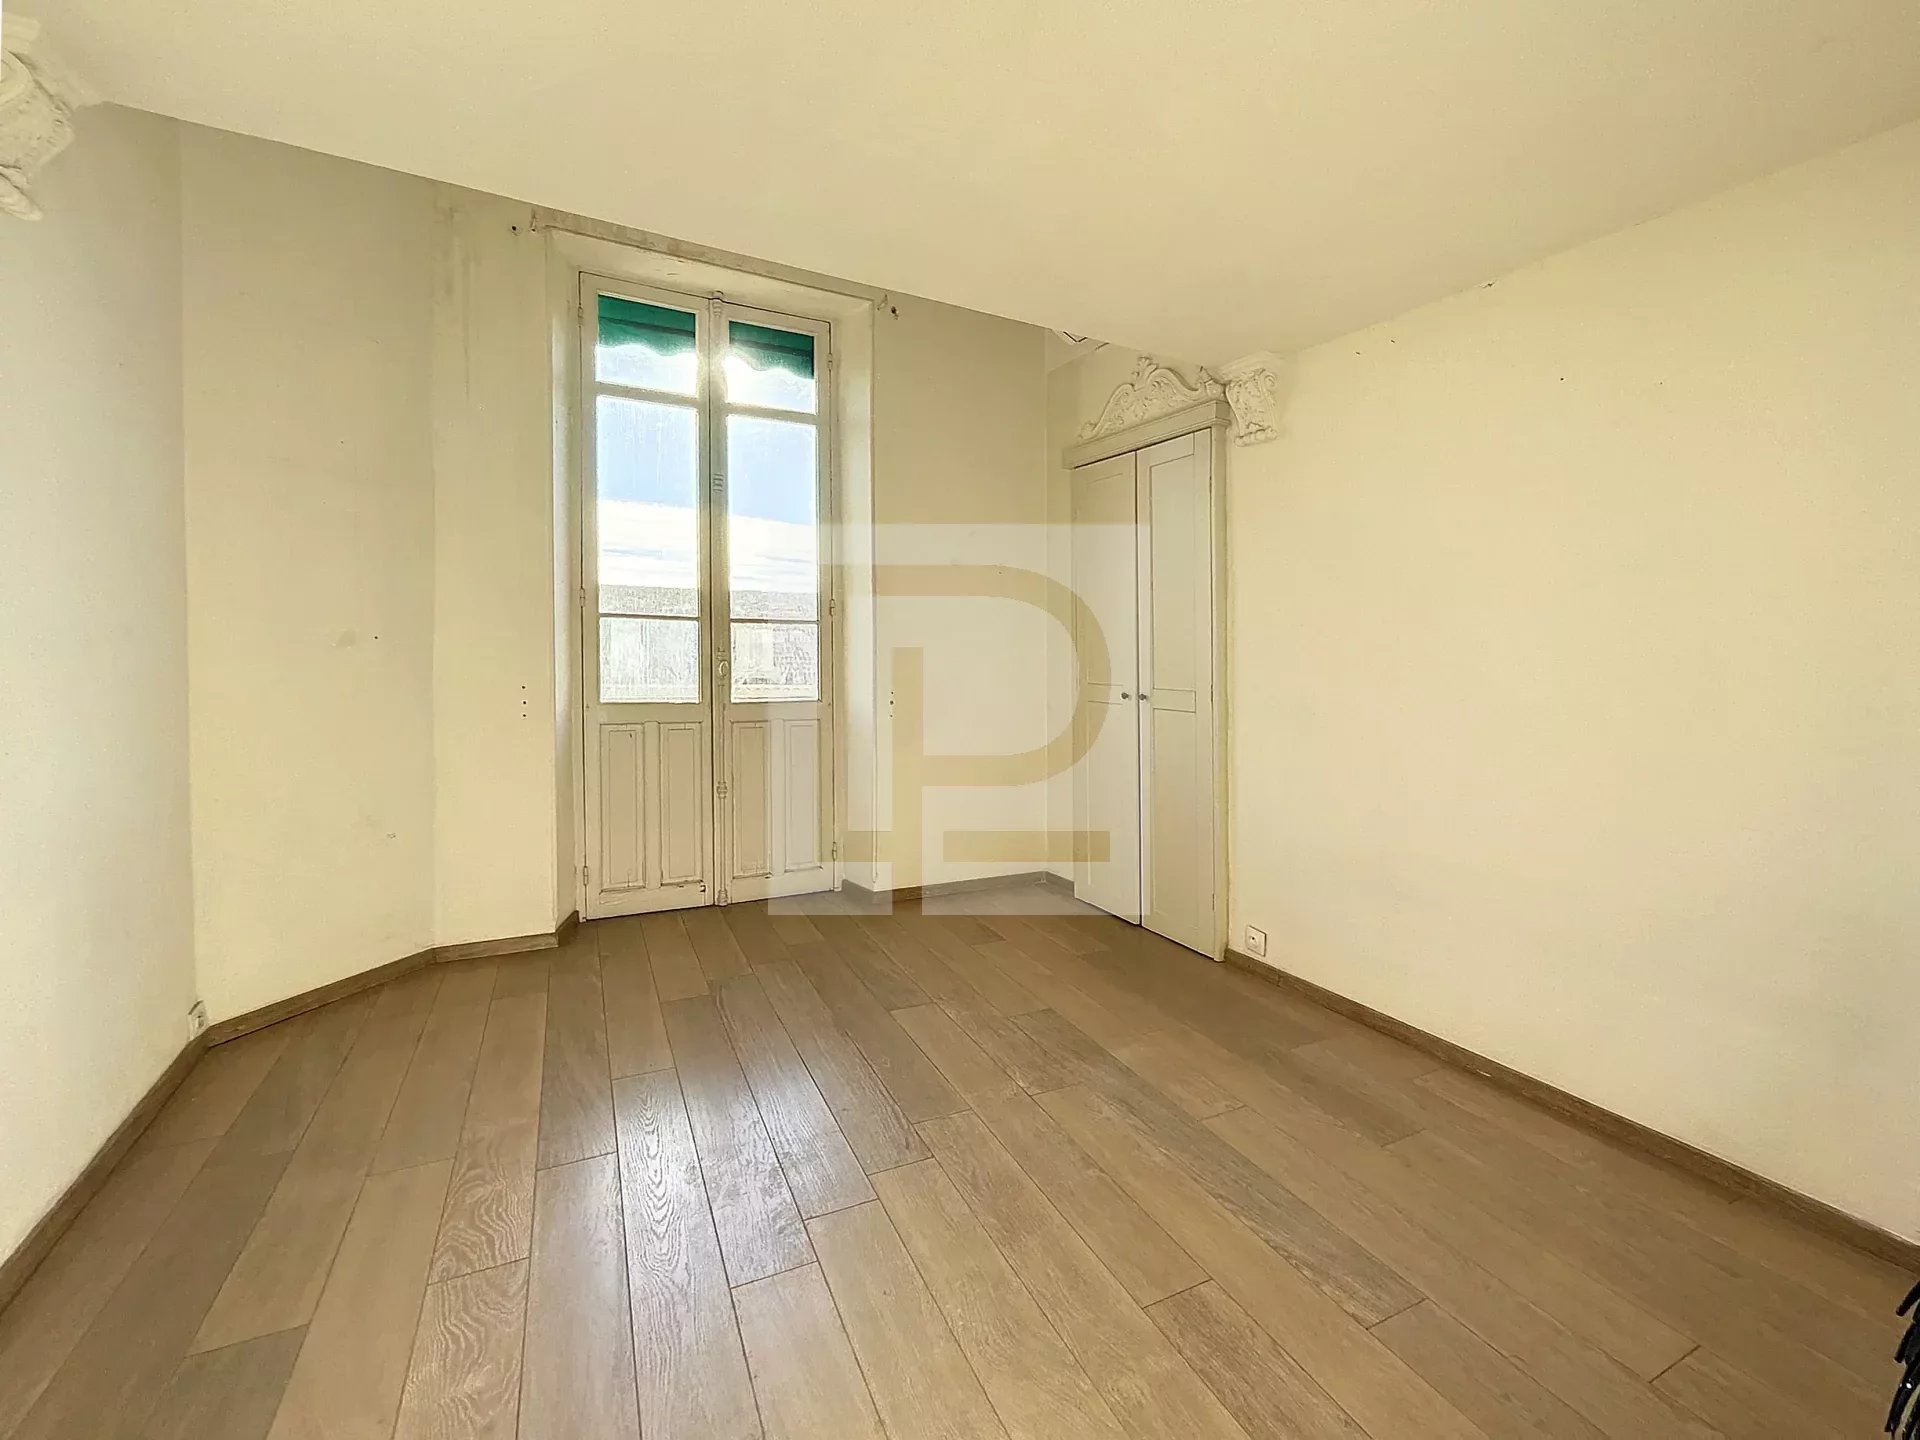 Stanislas area - Top floor apartment - Ideal location for everyday life